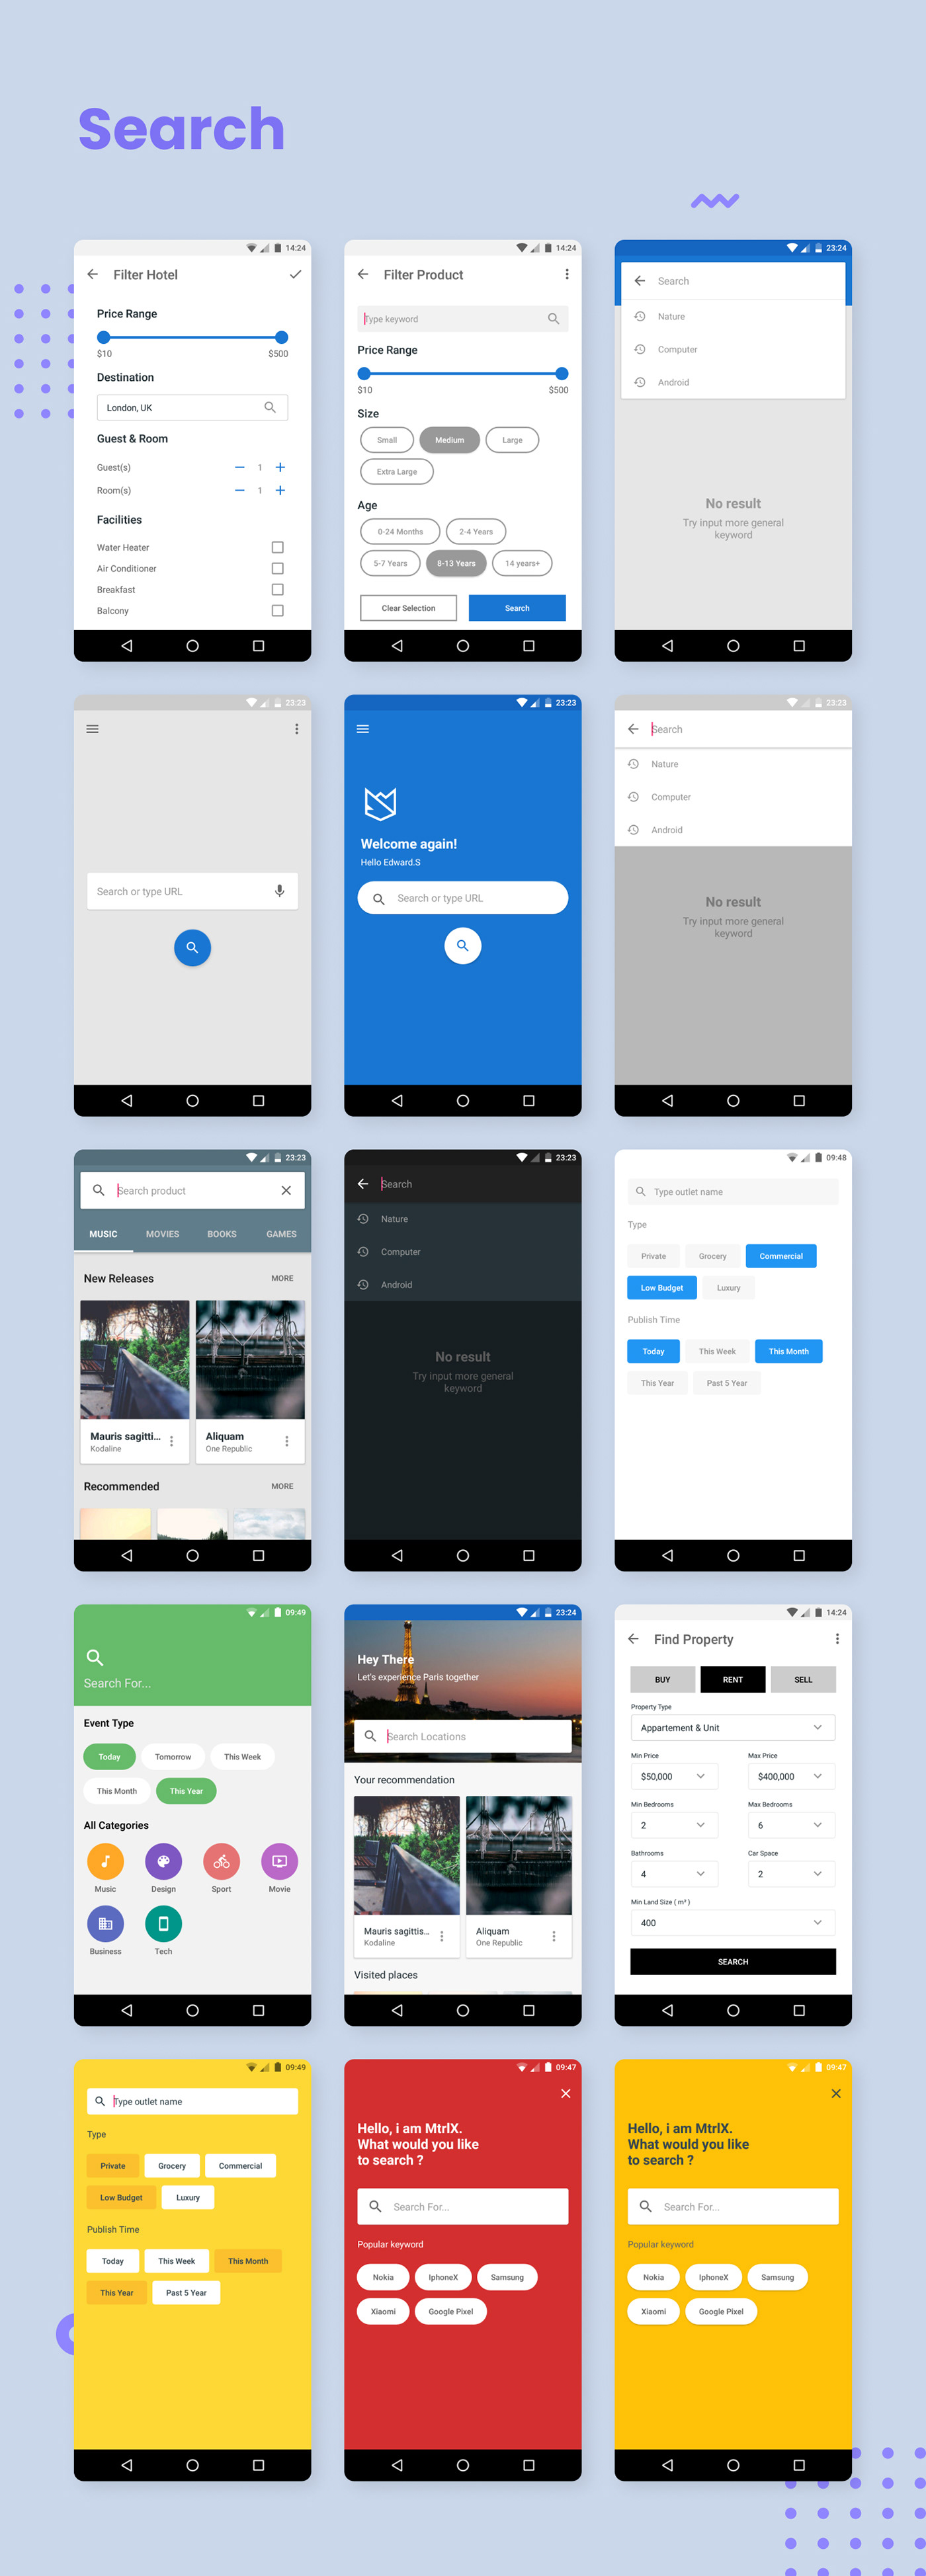 MaterialX - Interface do Android Material Design 2.8 - 29